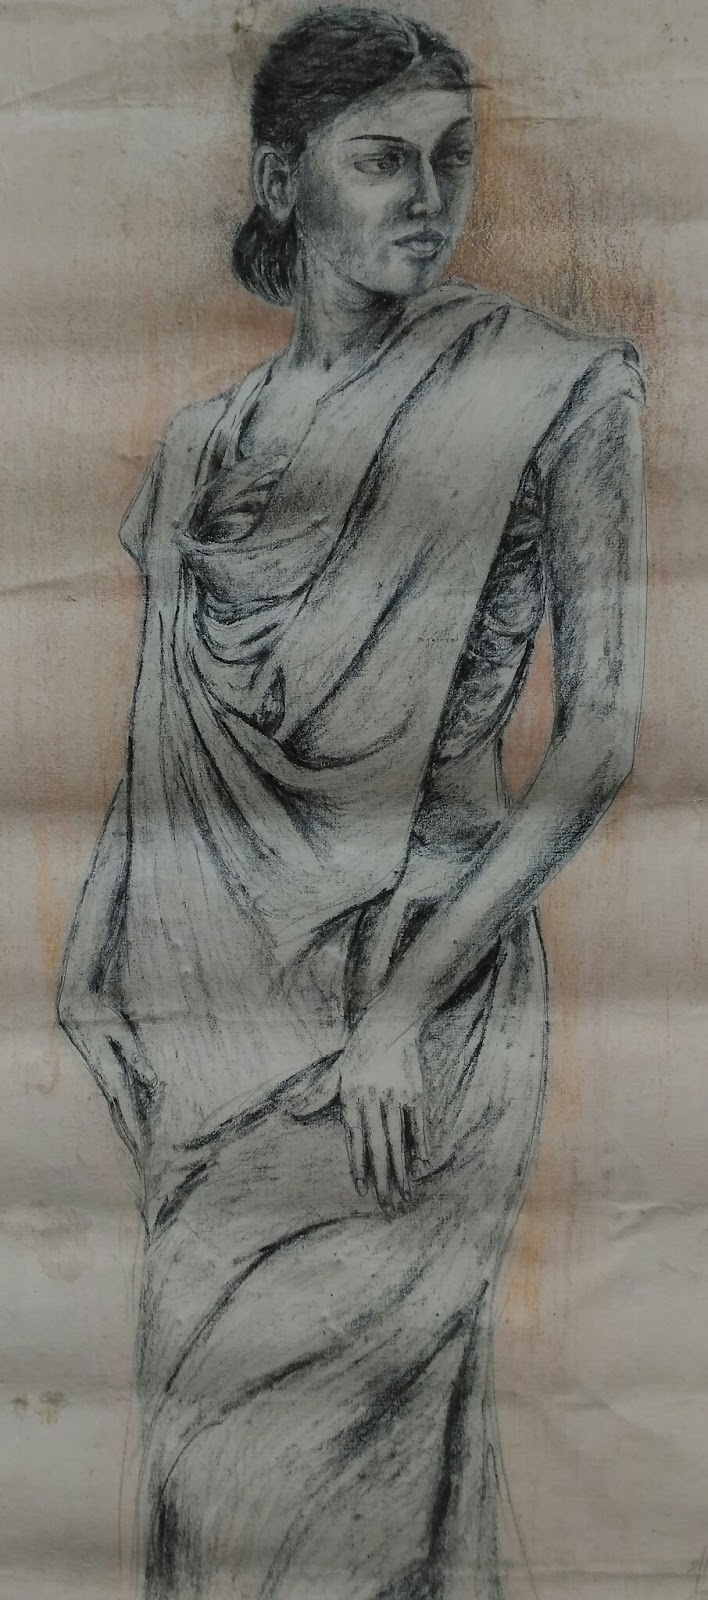 Indian lady in a Saree -Sketch by Gikki | Sketches, Art, Lady